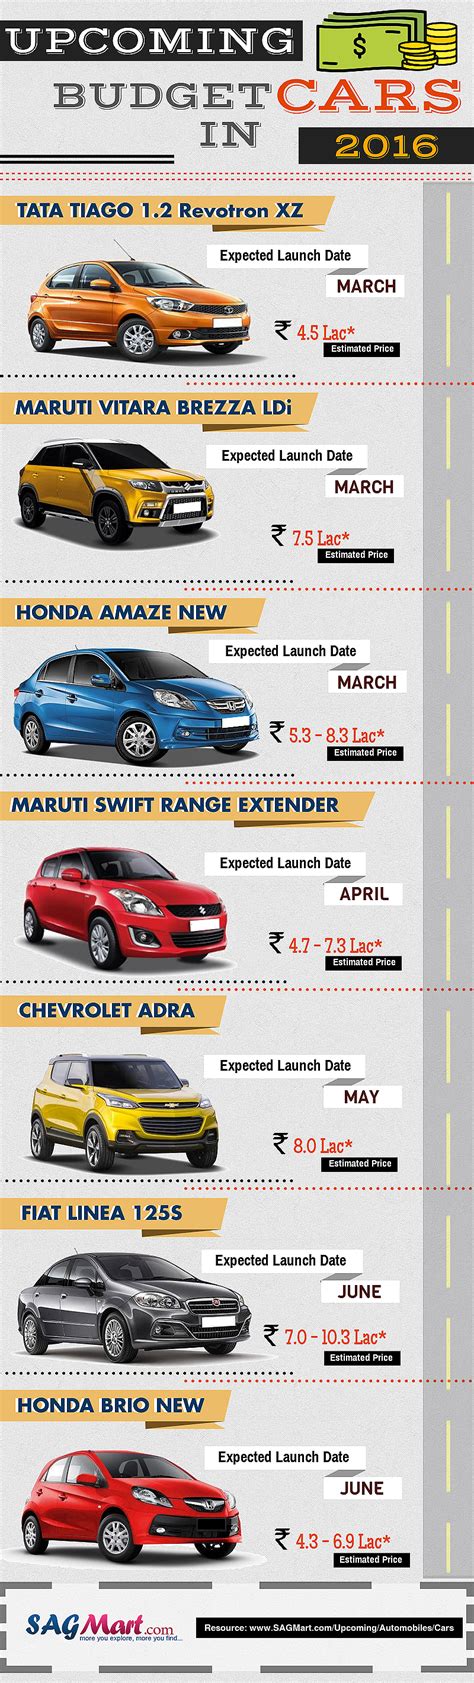 List Of Upcoming Budget Cars In India 2016 Infographic Sagmart